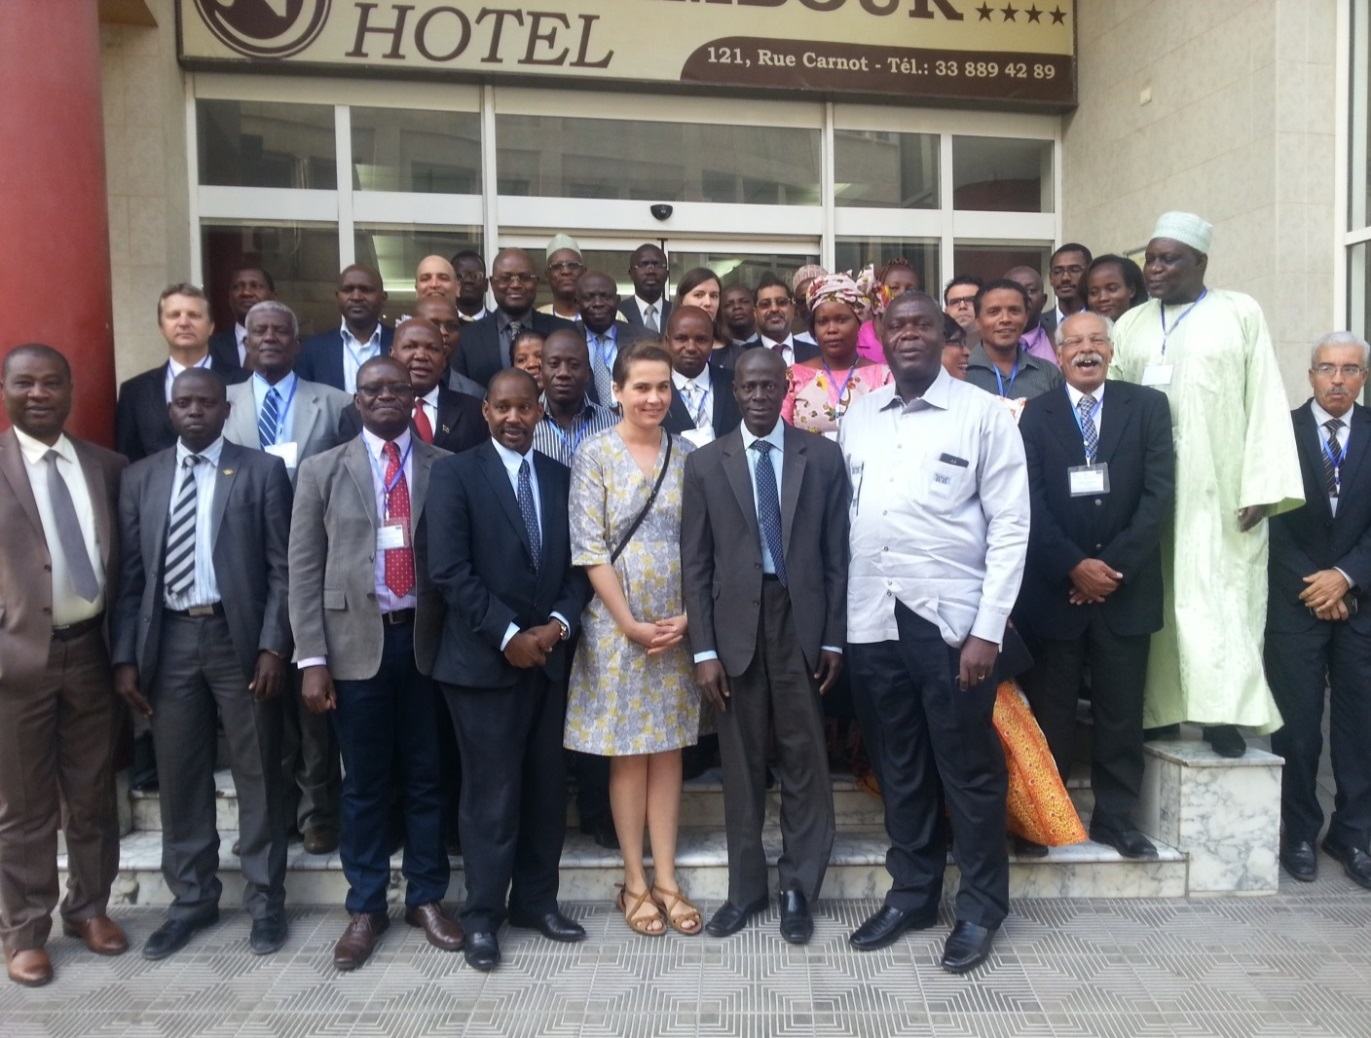  [© 2016 AU-IBAR. Press Release of the 2nd Steering Committee Meeting of the Fisheries Governance Project and the Fish Trade Project. 31st March, 2016 Dakar, Senegal.] © 2016 AU-IBAR. Press Release of the 2nd Steering Committee Meeting of the Fisheries Governance Project and the Fish Trade Project. 31st March, 2016 Dakar, Senegal